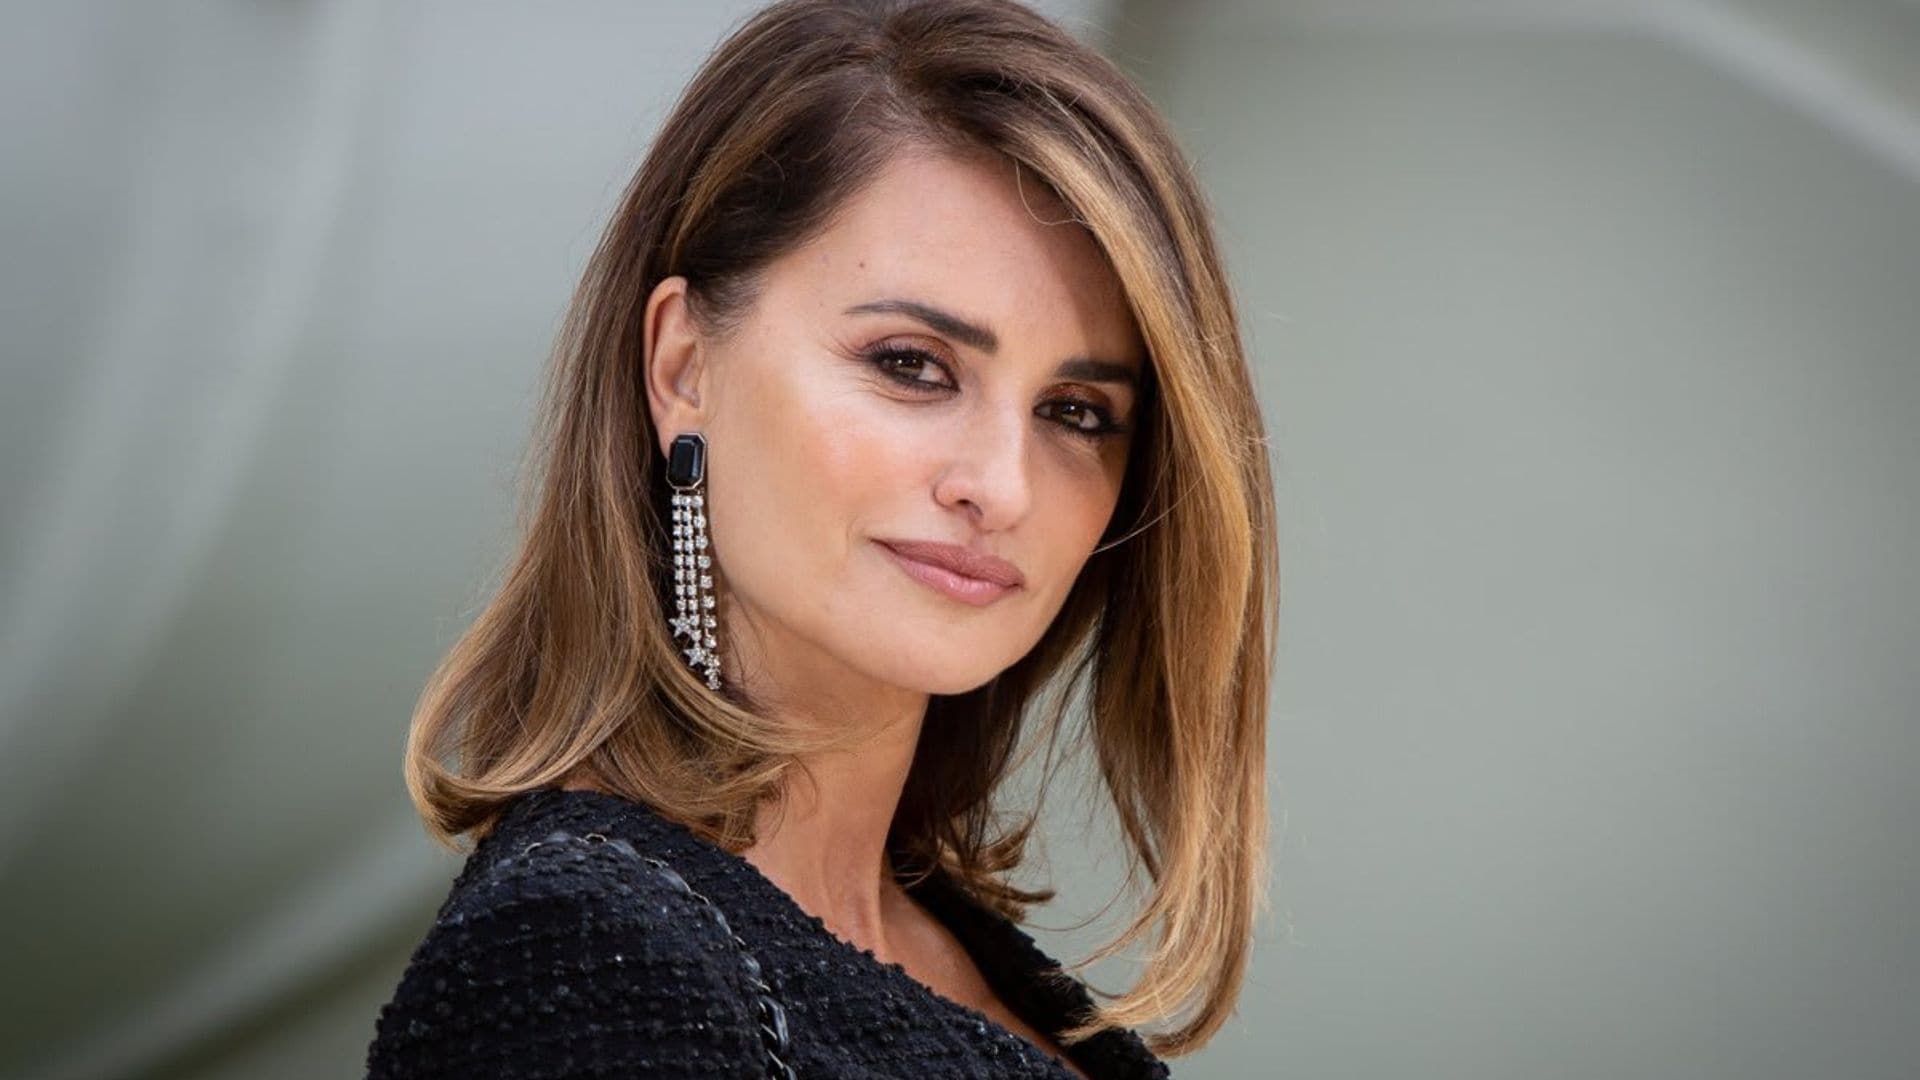 Penélope Cruz is set to be honored at the Museum of Modern Art’s 2021 Film Benefit